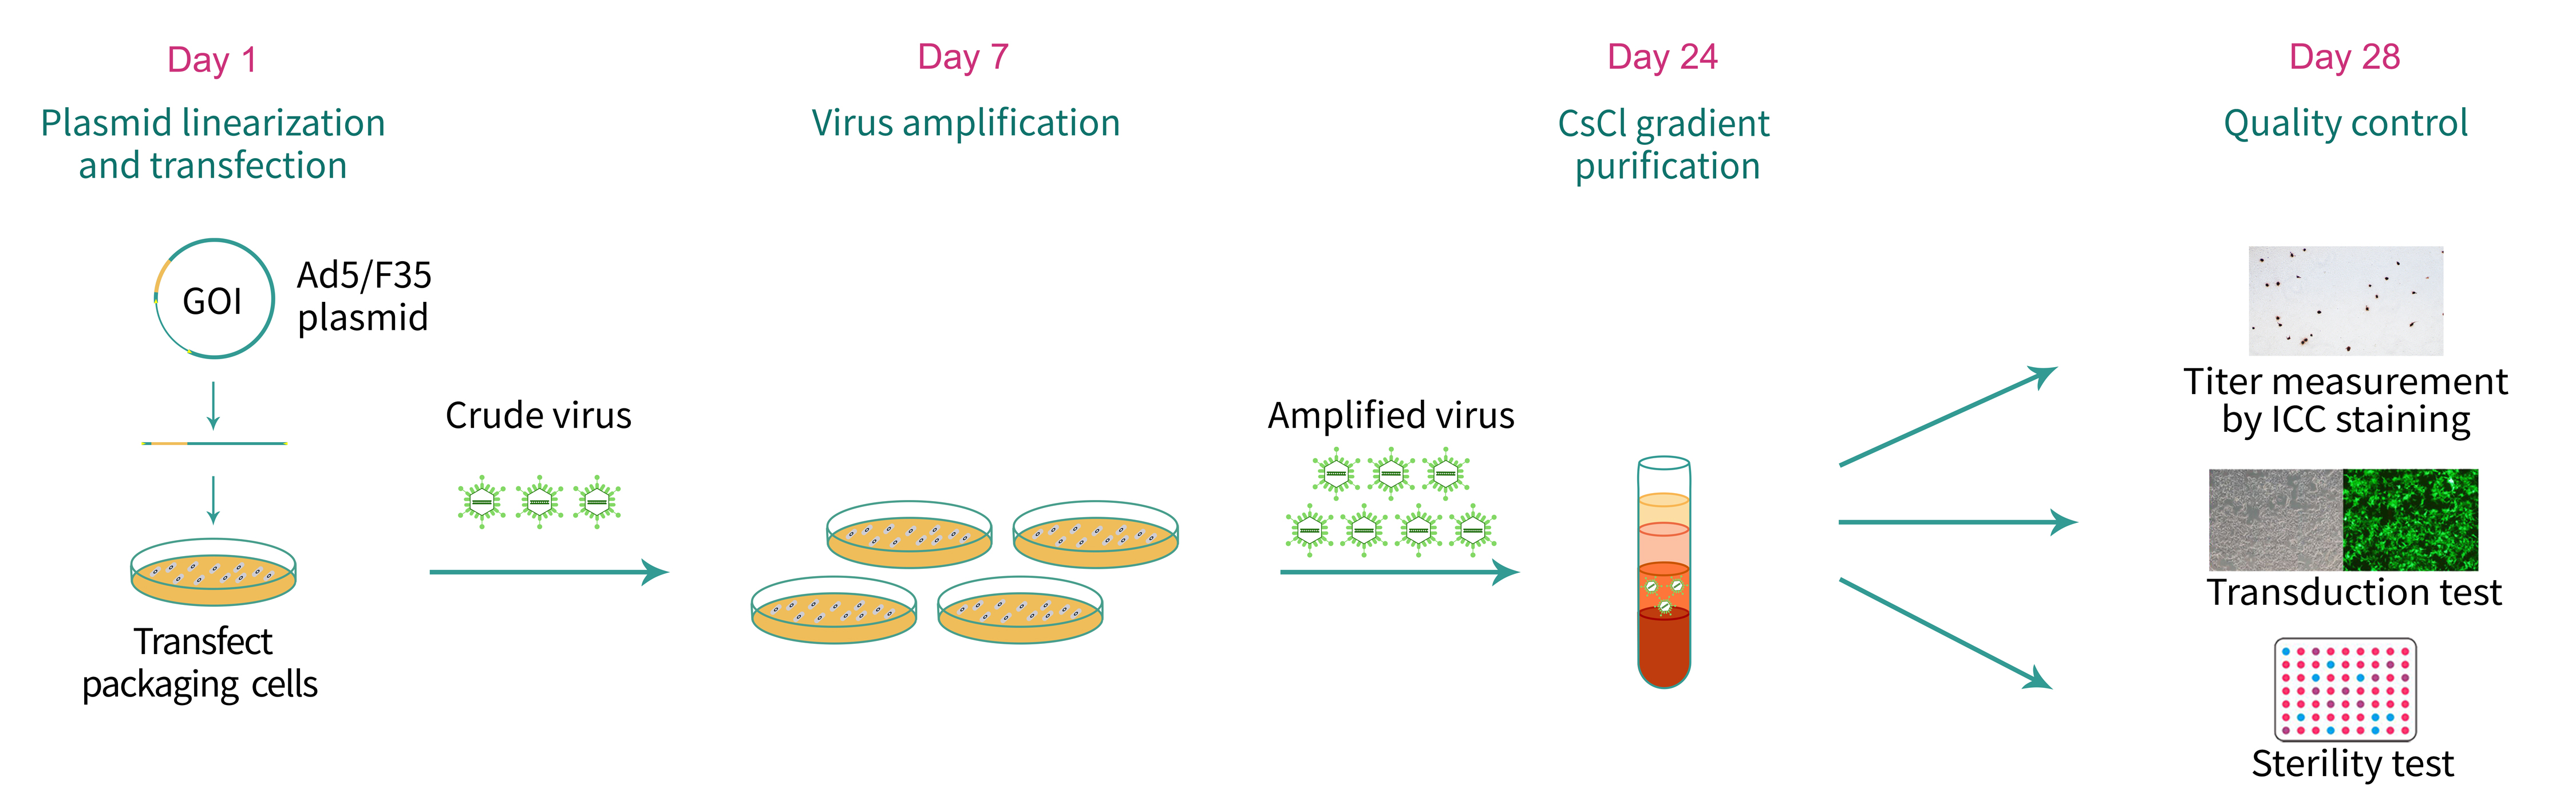 Typical workflow of chimeric Ad5/F35 adenovirus packaging and quality control.